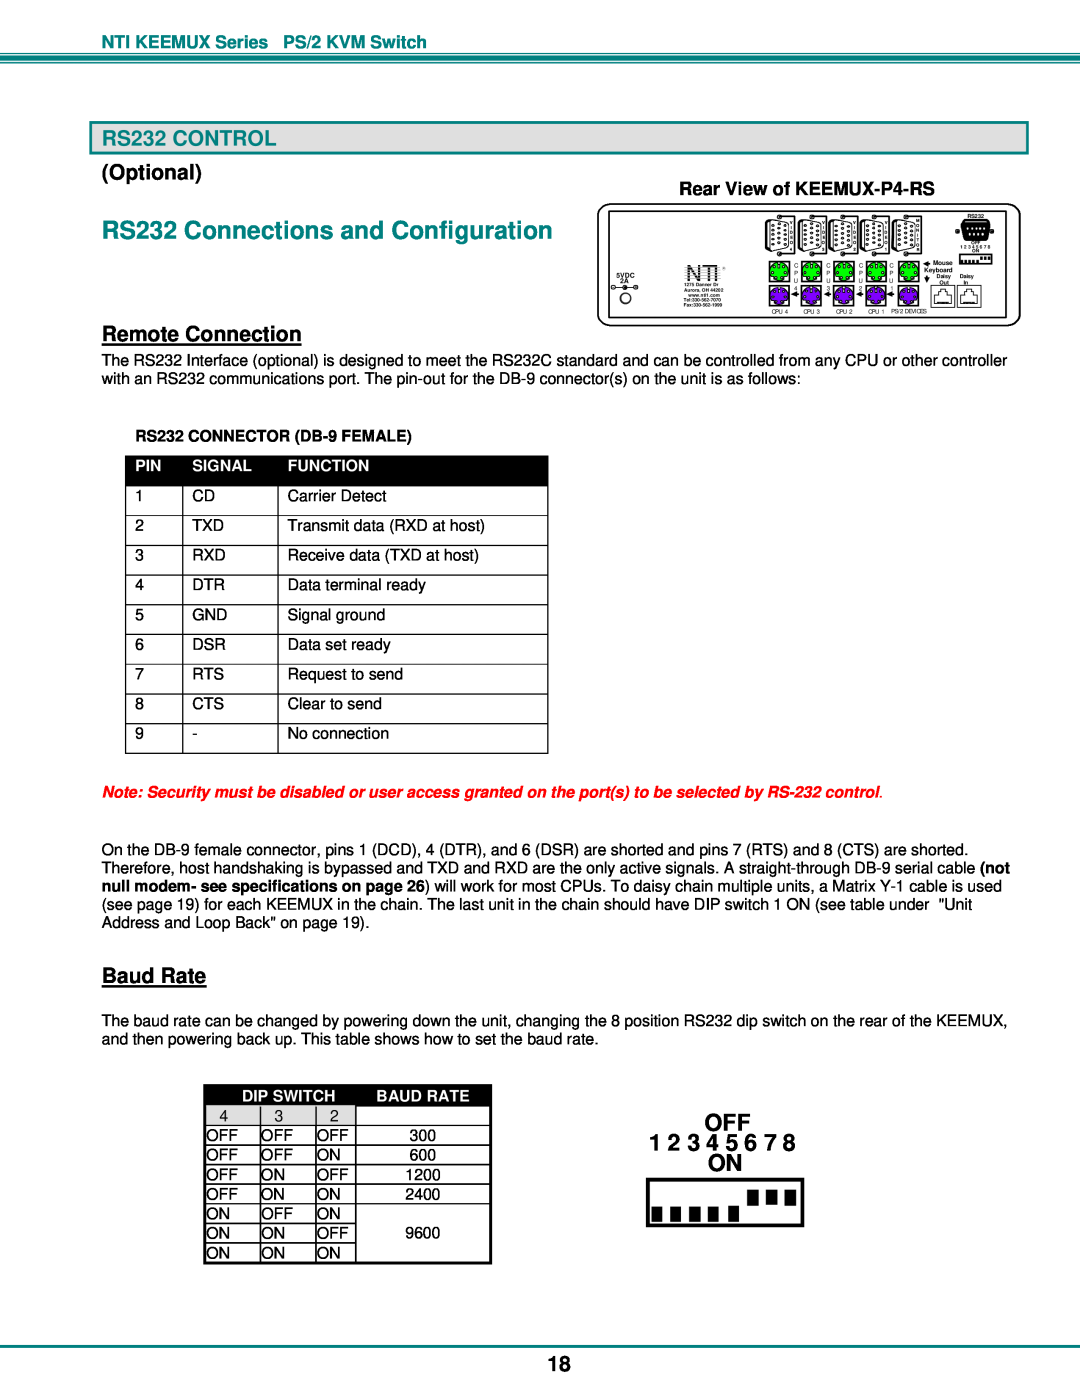 Network Technologies PS/2 KVM RS232 Connections and Configuration, RS232 CONTROL, Remote Connection, Baud Rate, Signal 